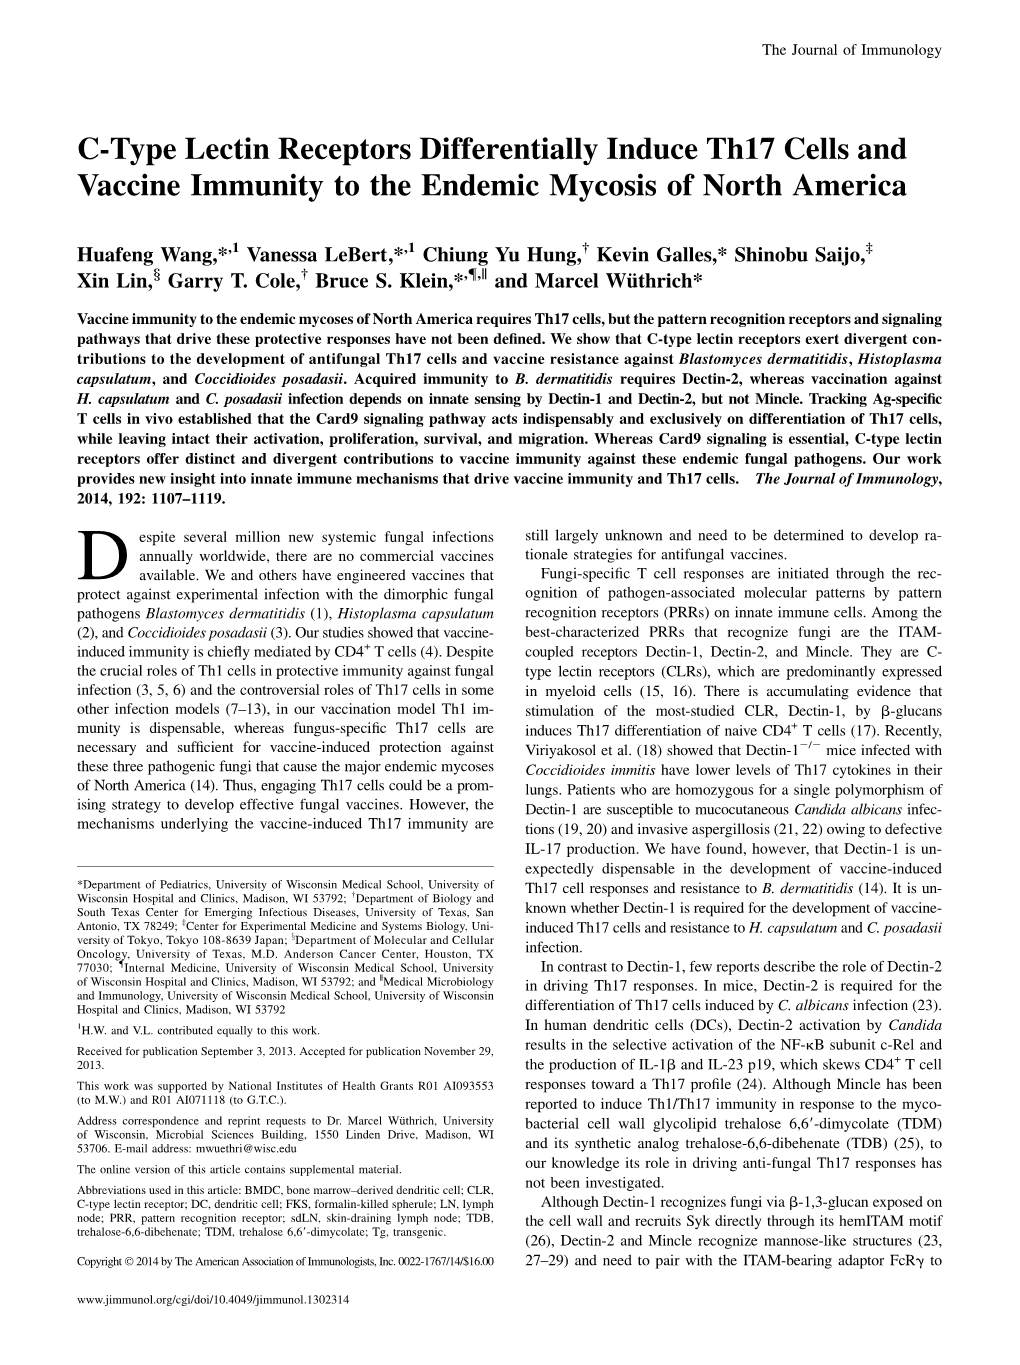 The Endemic Mycosis of North America Induce Th17 Cells and Vaccine